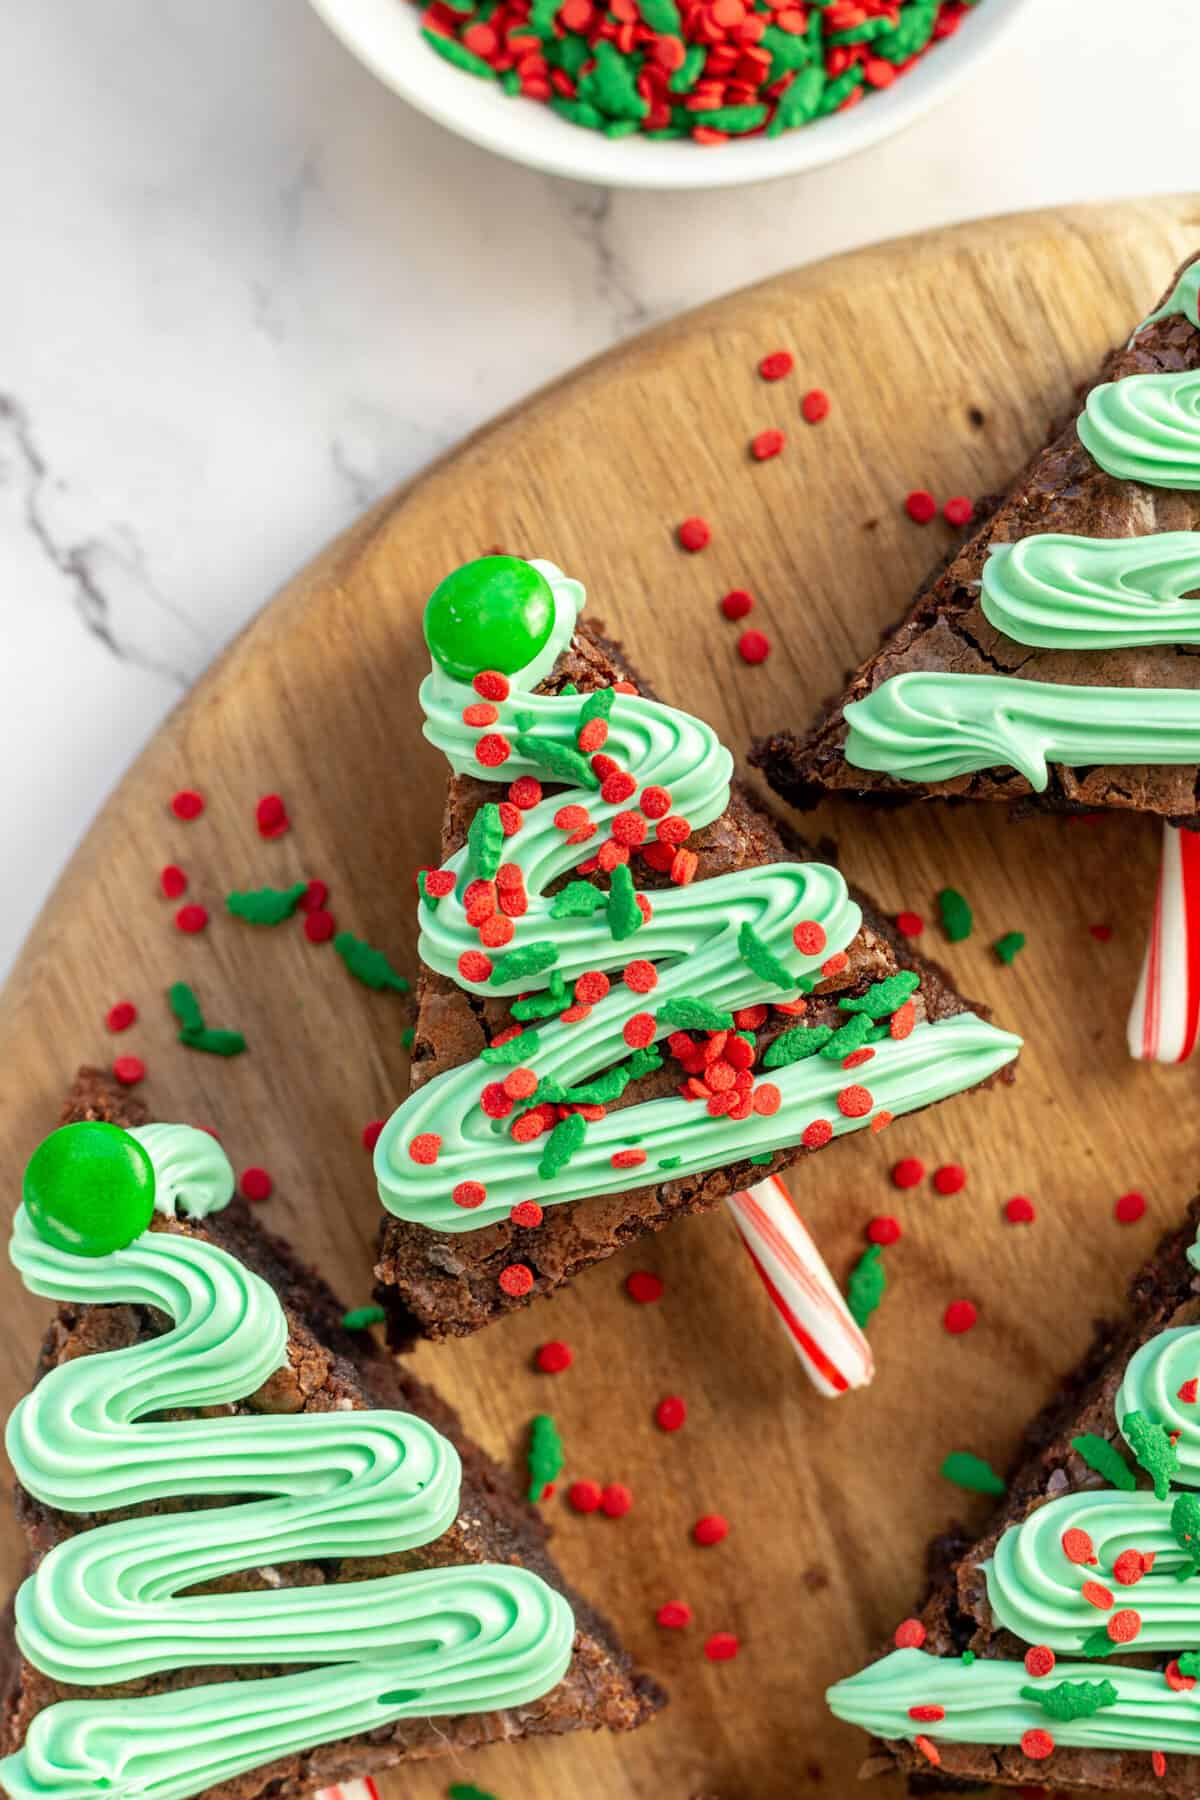 close up image of a christmas tree brownie with frosting garland and red and green sprinkles with a green M&M for a star and a candy cane stick for a trunk, served on a round wooden board